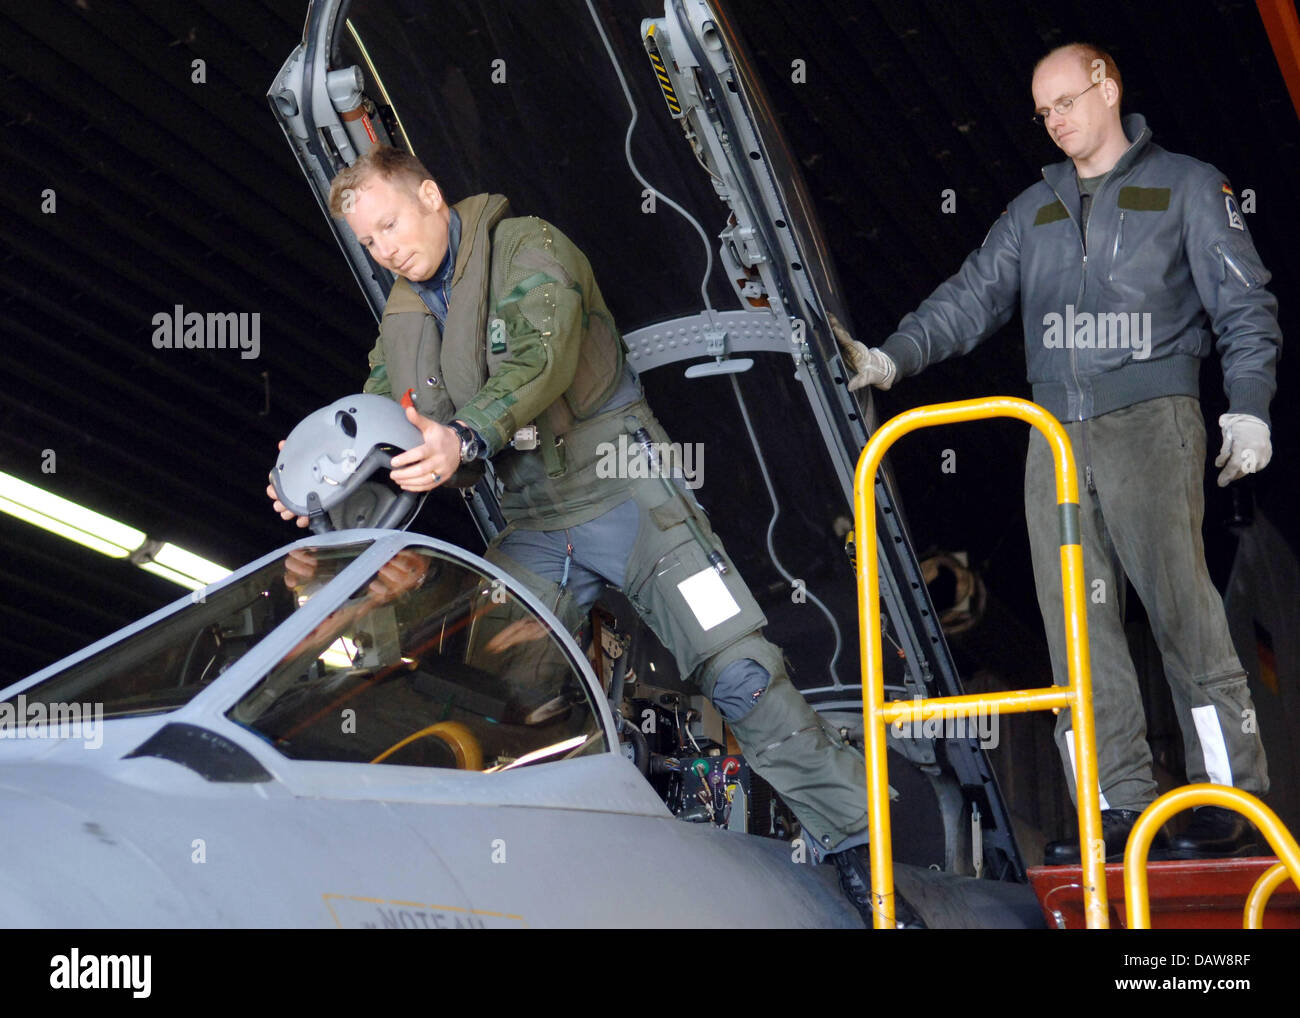 Pilot Alexander S. (L) of 'Aufklaerungsgeschwader 51 Immelmann' enters the cockpit of a Tornado fighter bomber plane at Jagel airbase in Germany, Tuesday, 13 March 2007. The Tornados will be deployed on a Recce mission in support of other NATO ISAF troops in southern Afghanistan. Photo: Wulf Pfeiffer Stock Photo